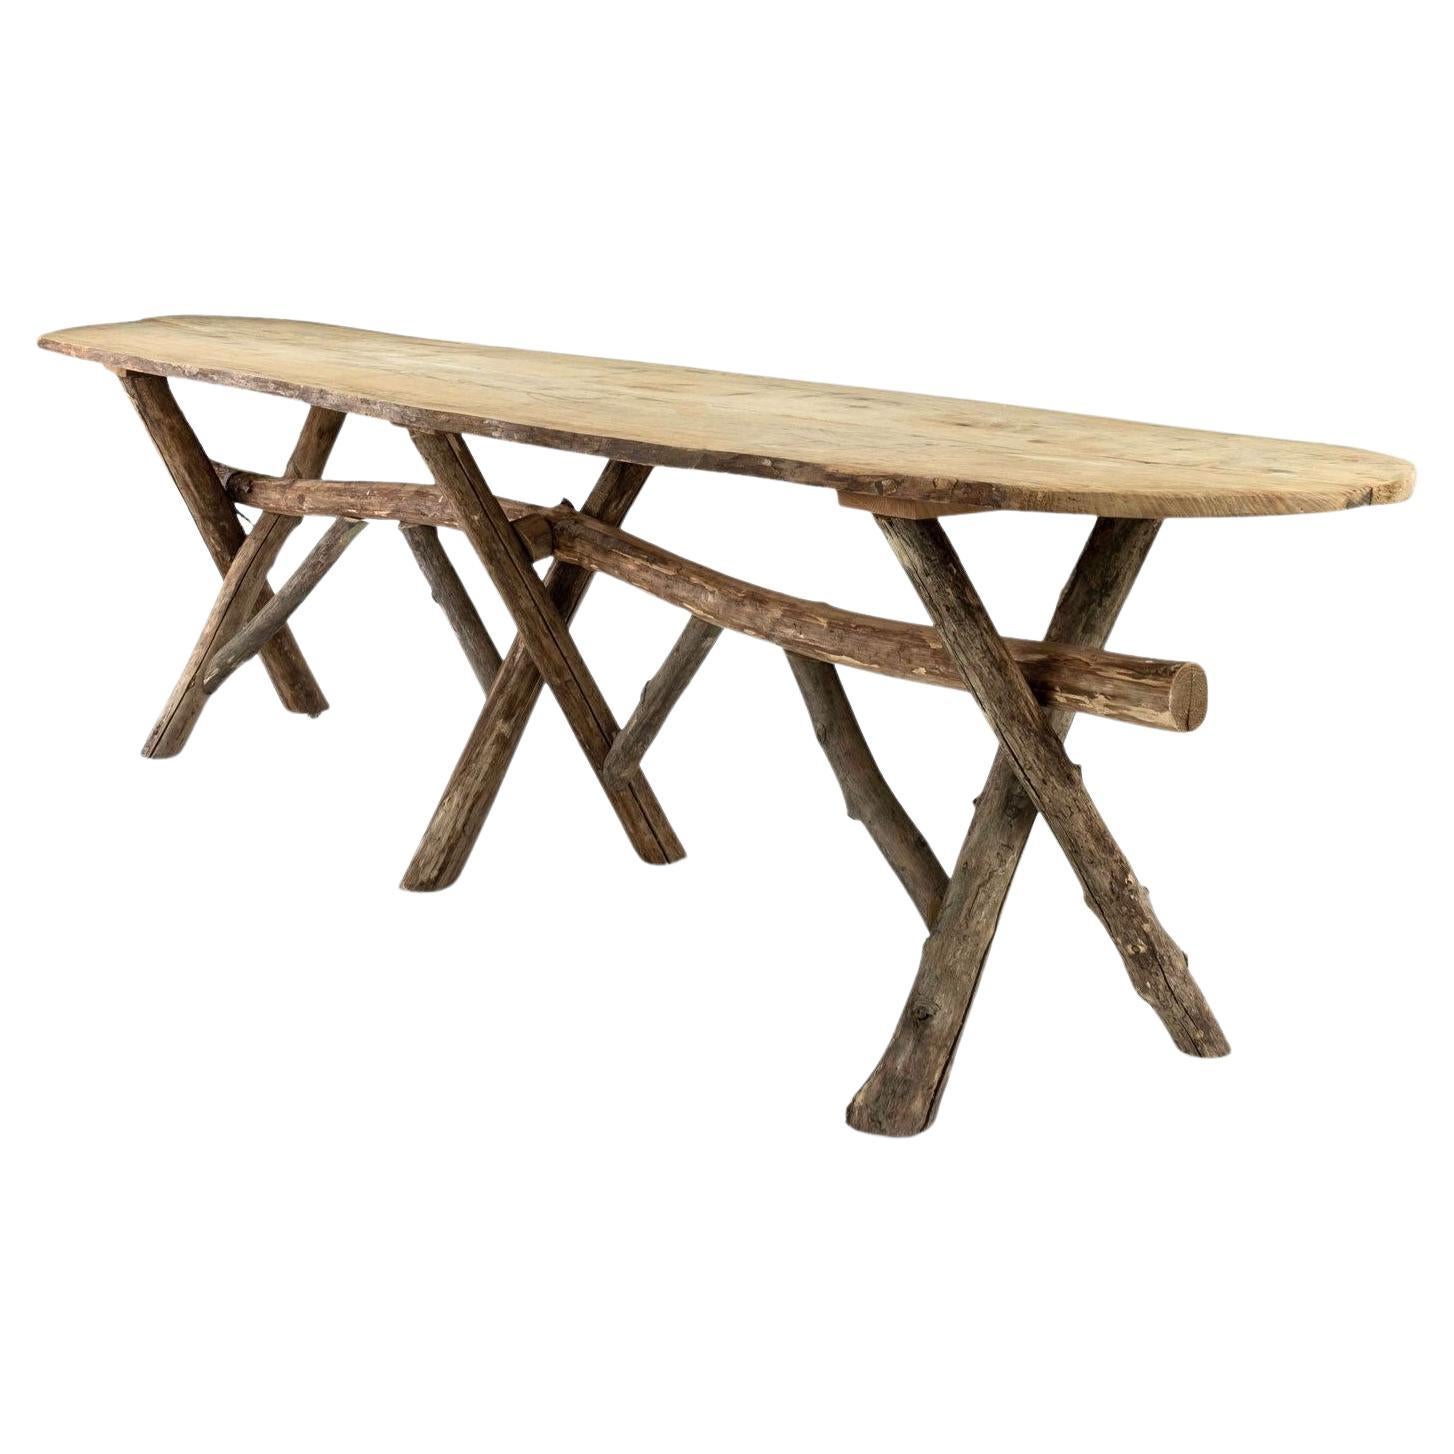 Long Live-Edge Oval Top Table with Natural Shaped Trestle Base